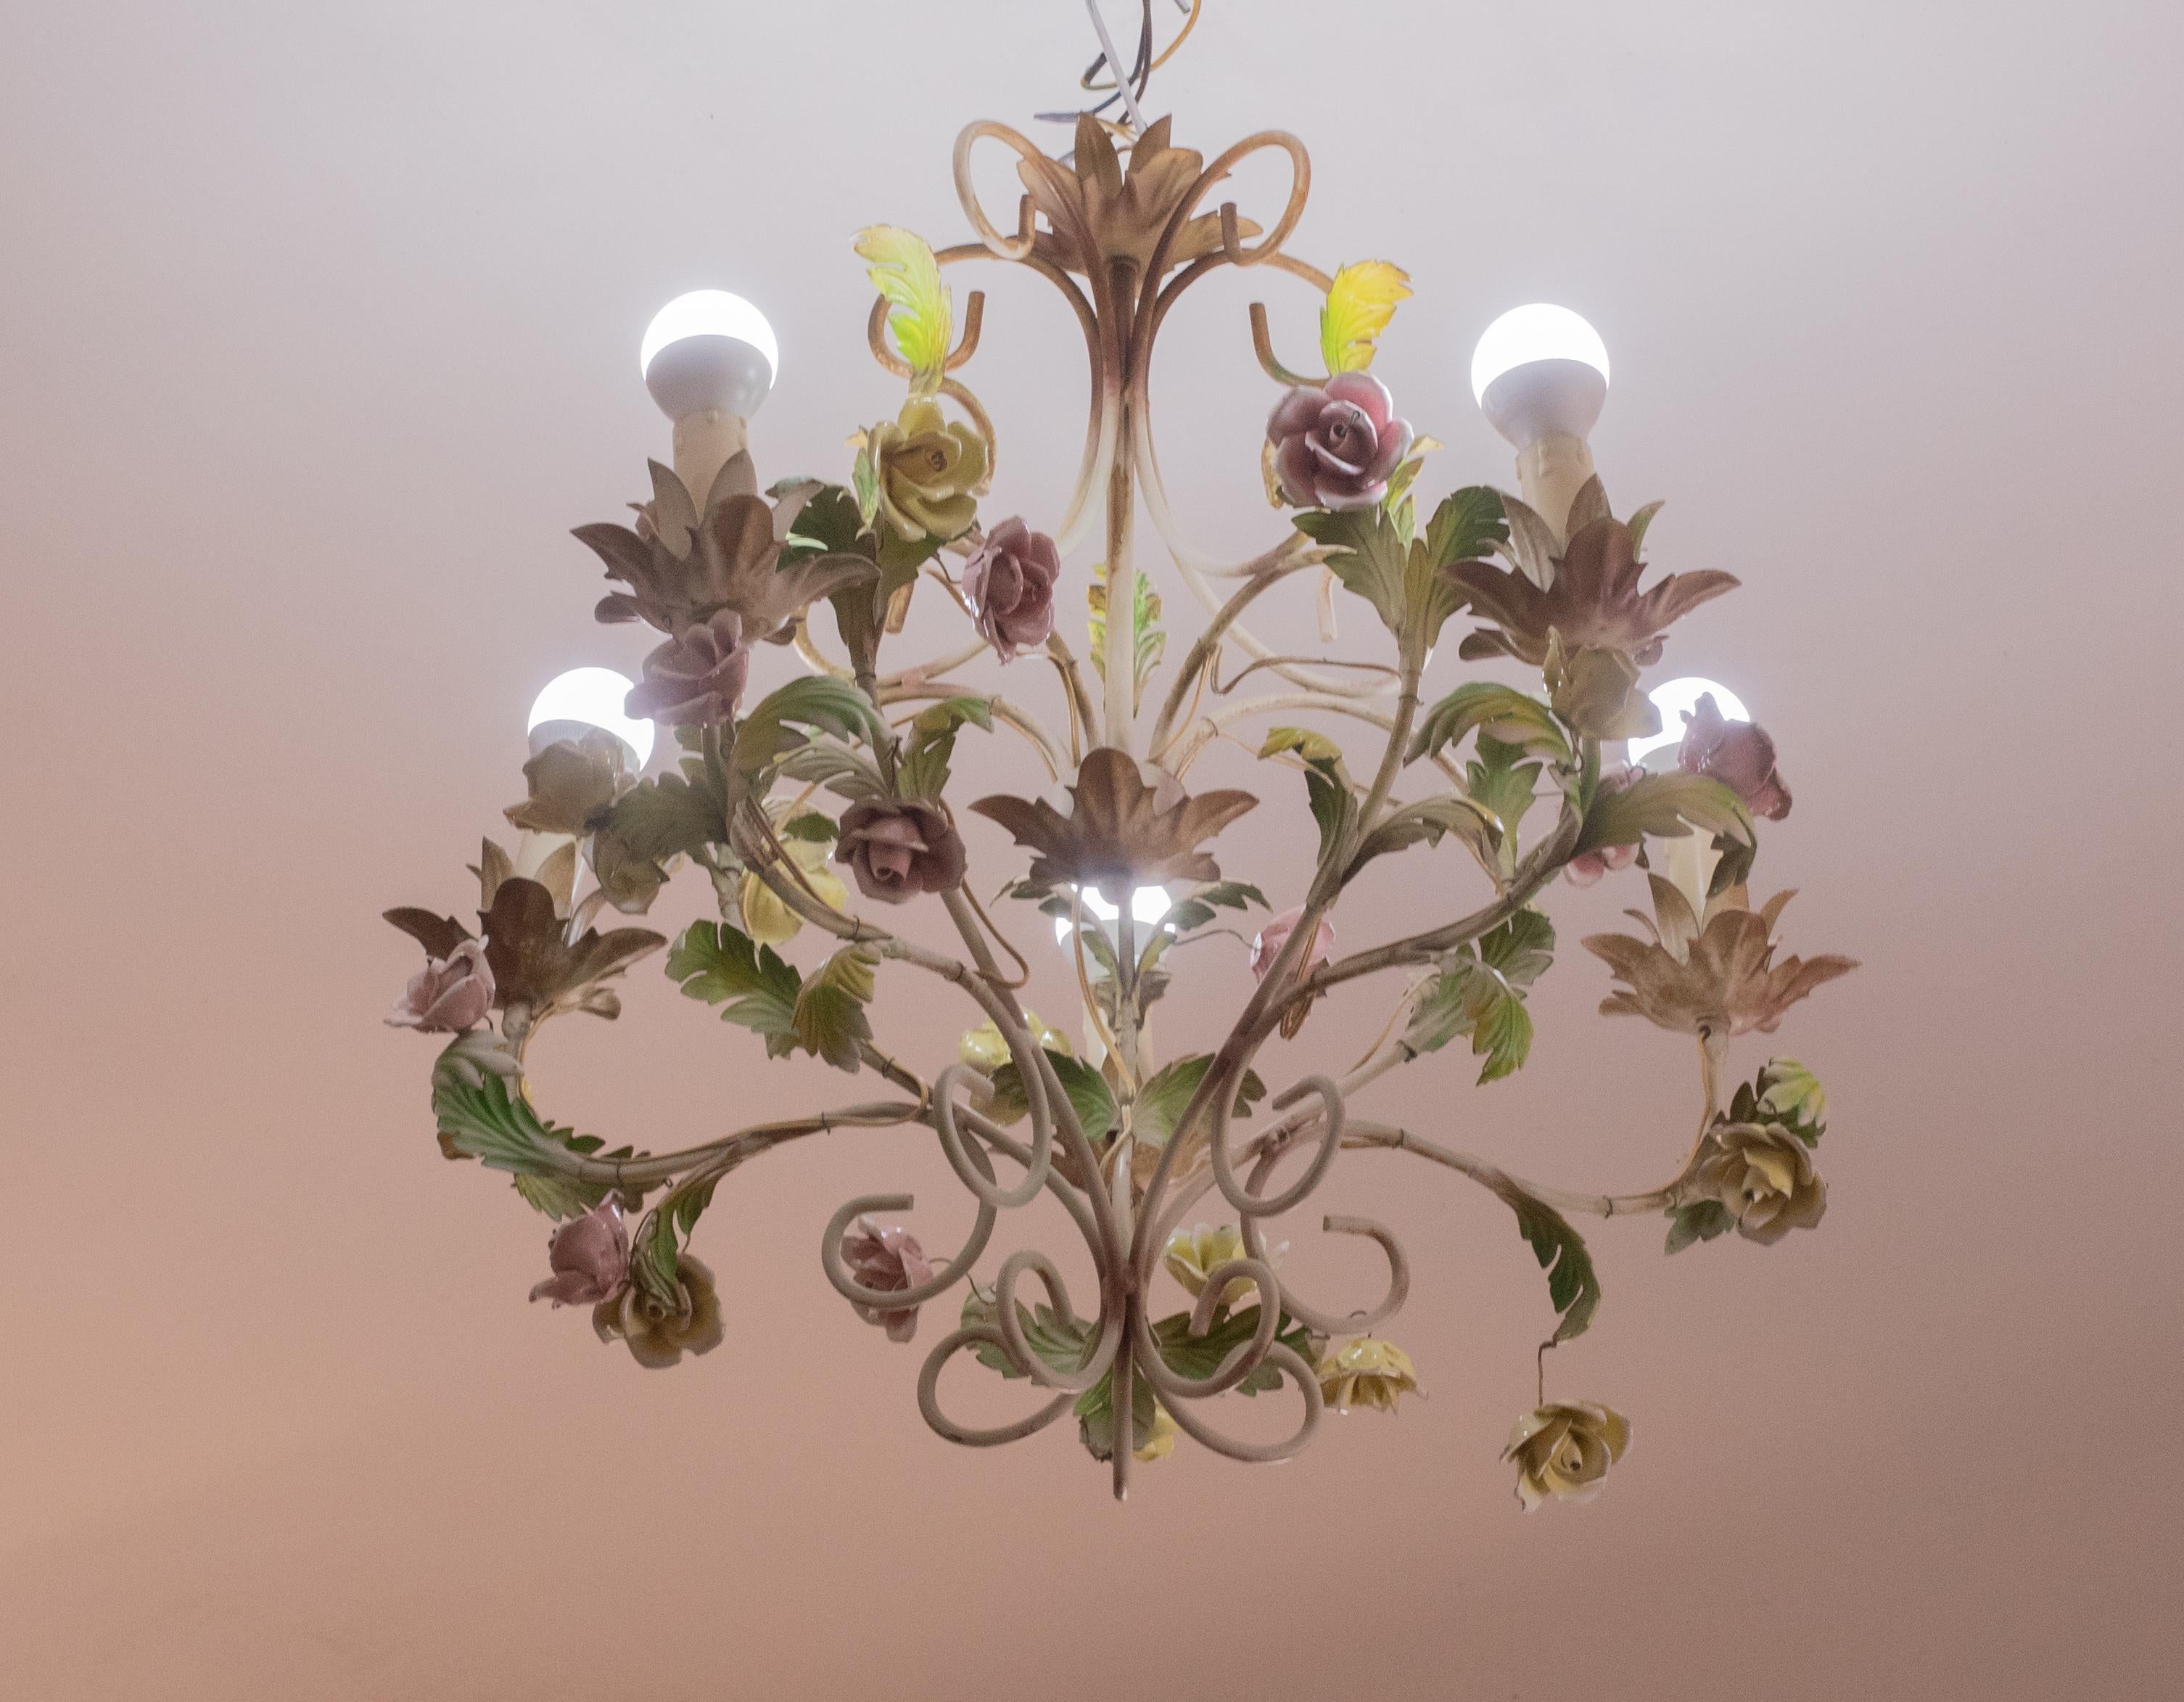 Vintage Italian painted iron chandelier with ceramic flowers.

Period circa 1970s

The chandelier has a painted iron frame and is decorated with beautiful handmade ceramic flowers.

The light mounts 5 e14 lamp holders, European